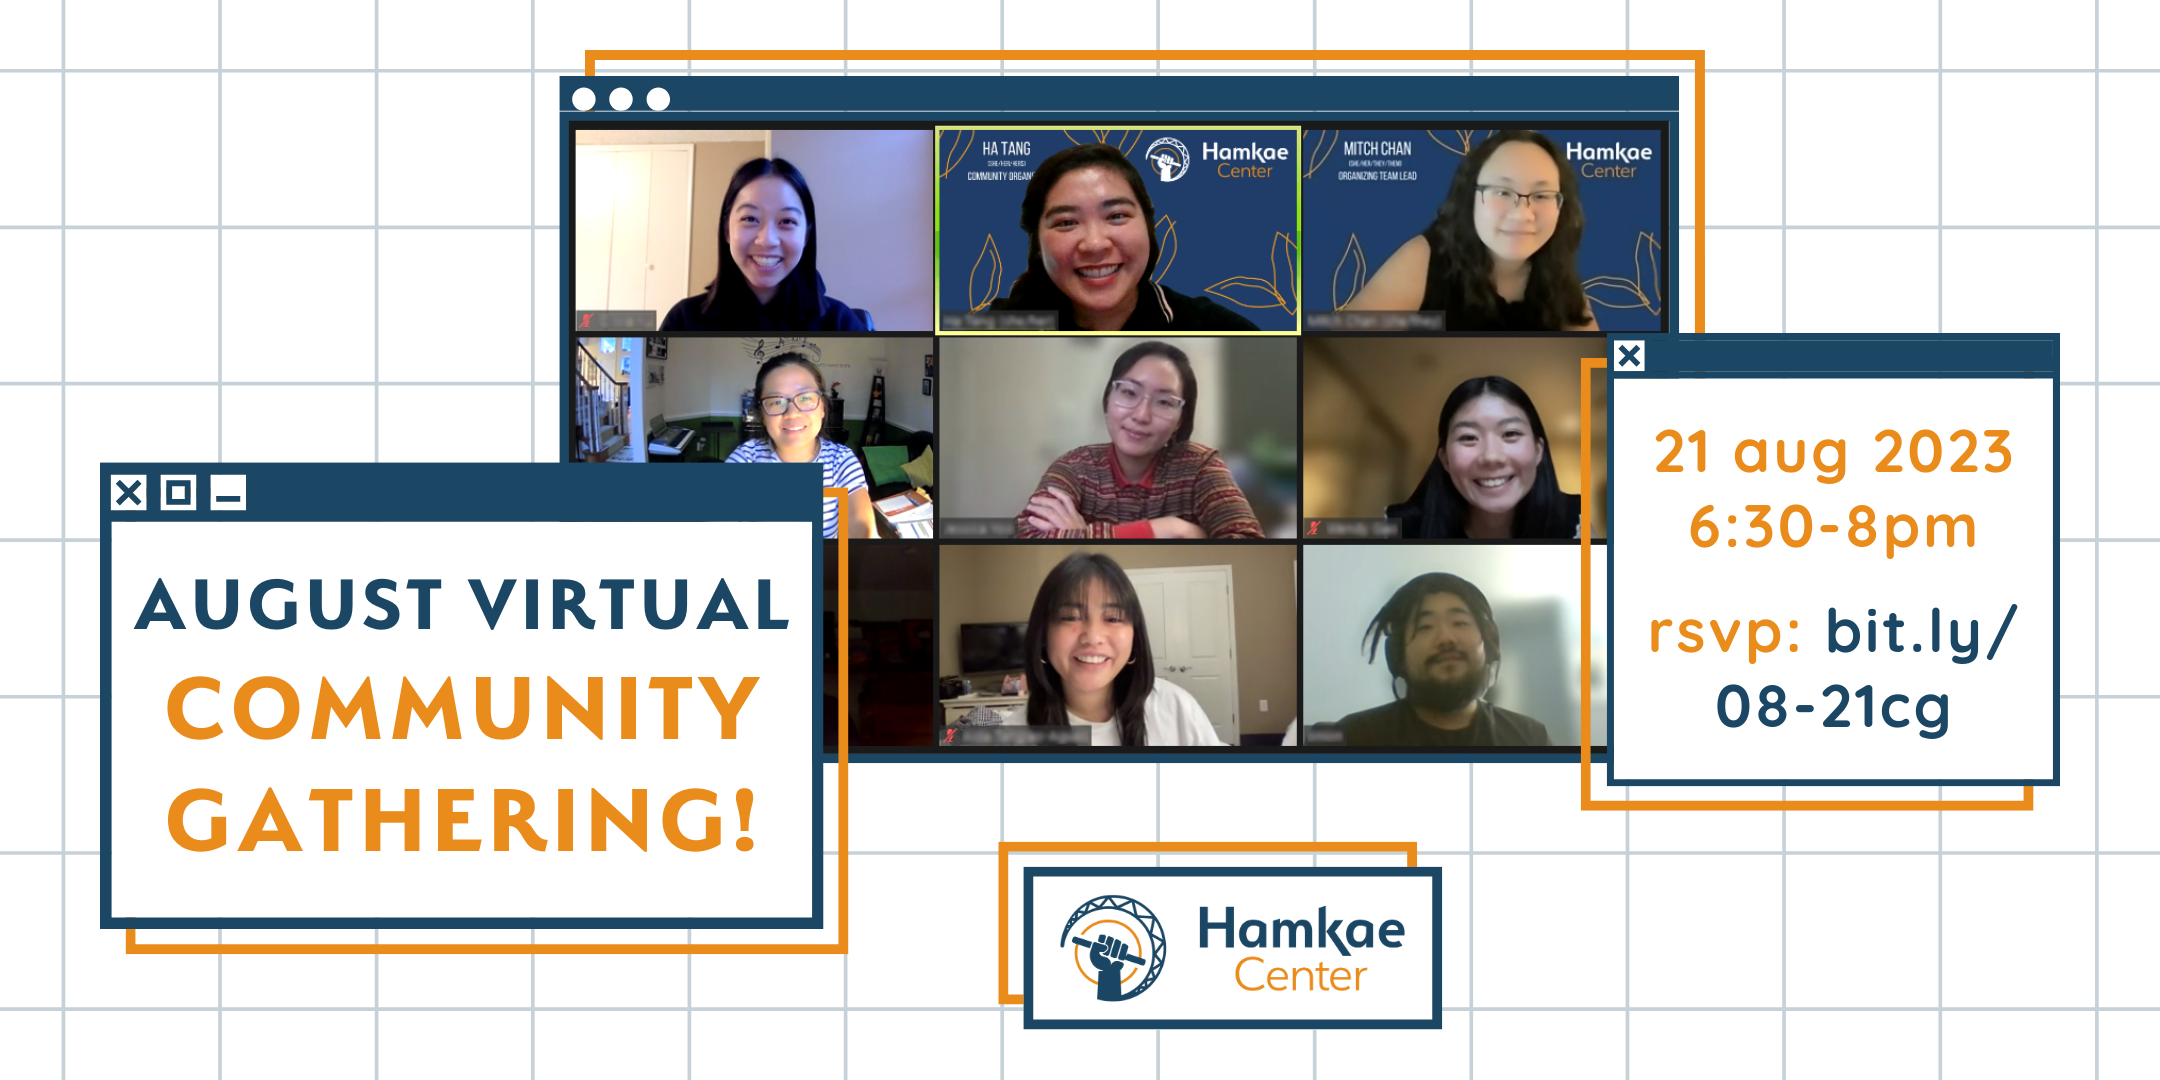 Graphic with a photo of Hamkae Center staff and community members smiling for a screenshot during a virtual meeting, advertising Hamkae Center's August Virtual Community Gathering on August 21, 2023 at 6:30-8pm. RSVP: bit.ly/08-21cg